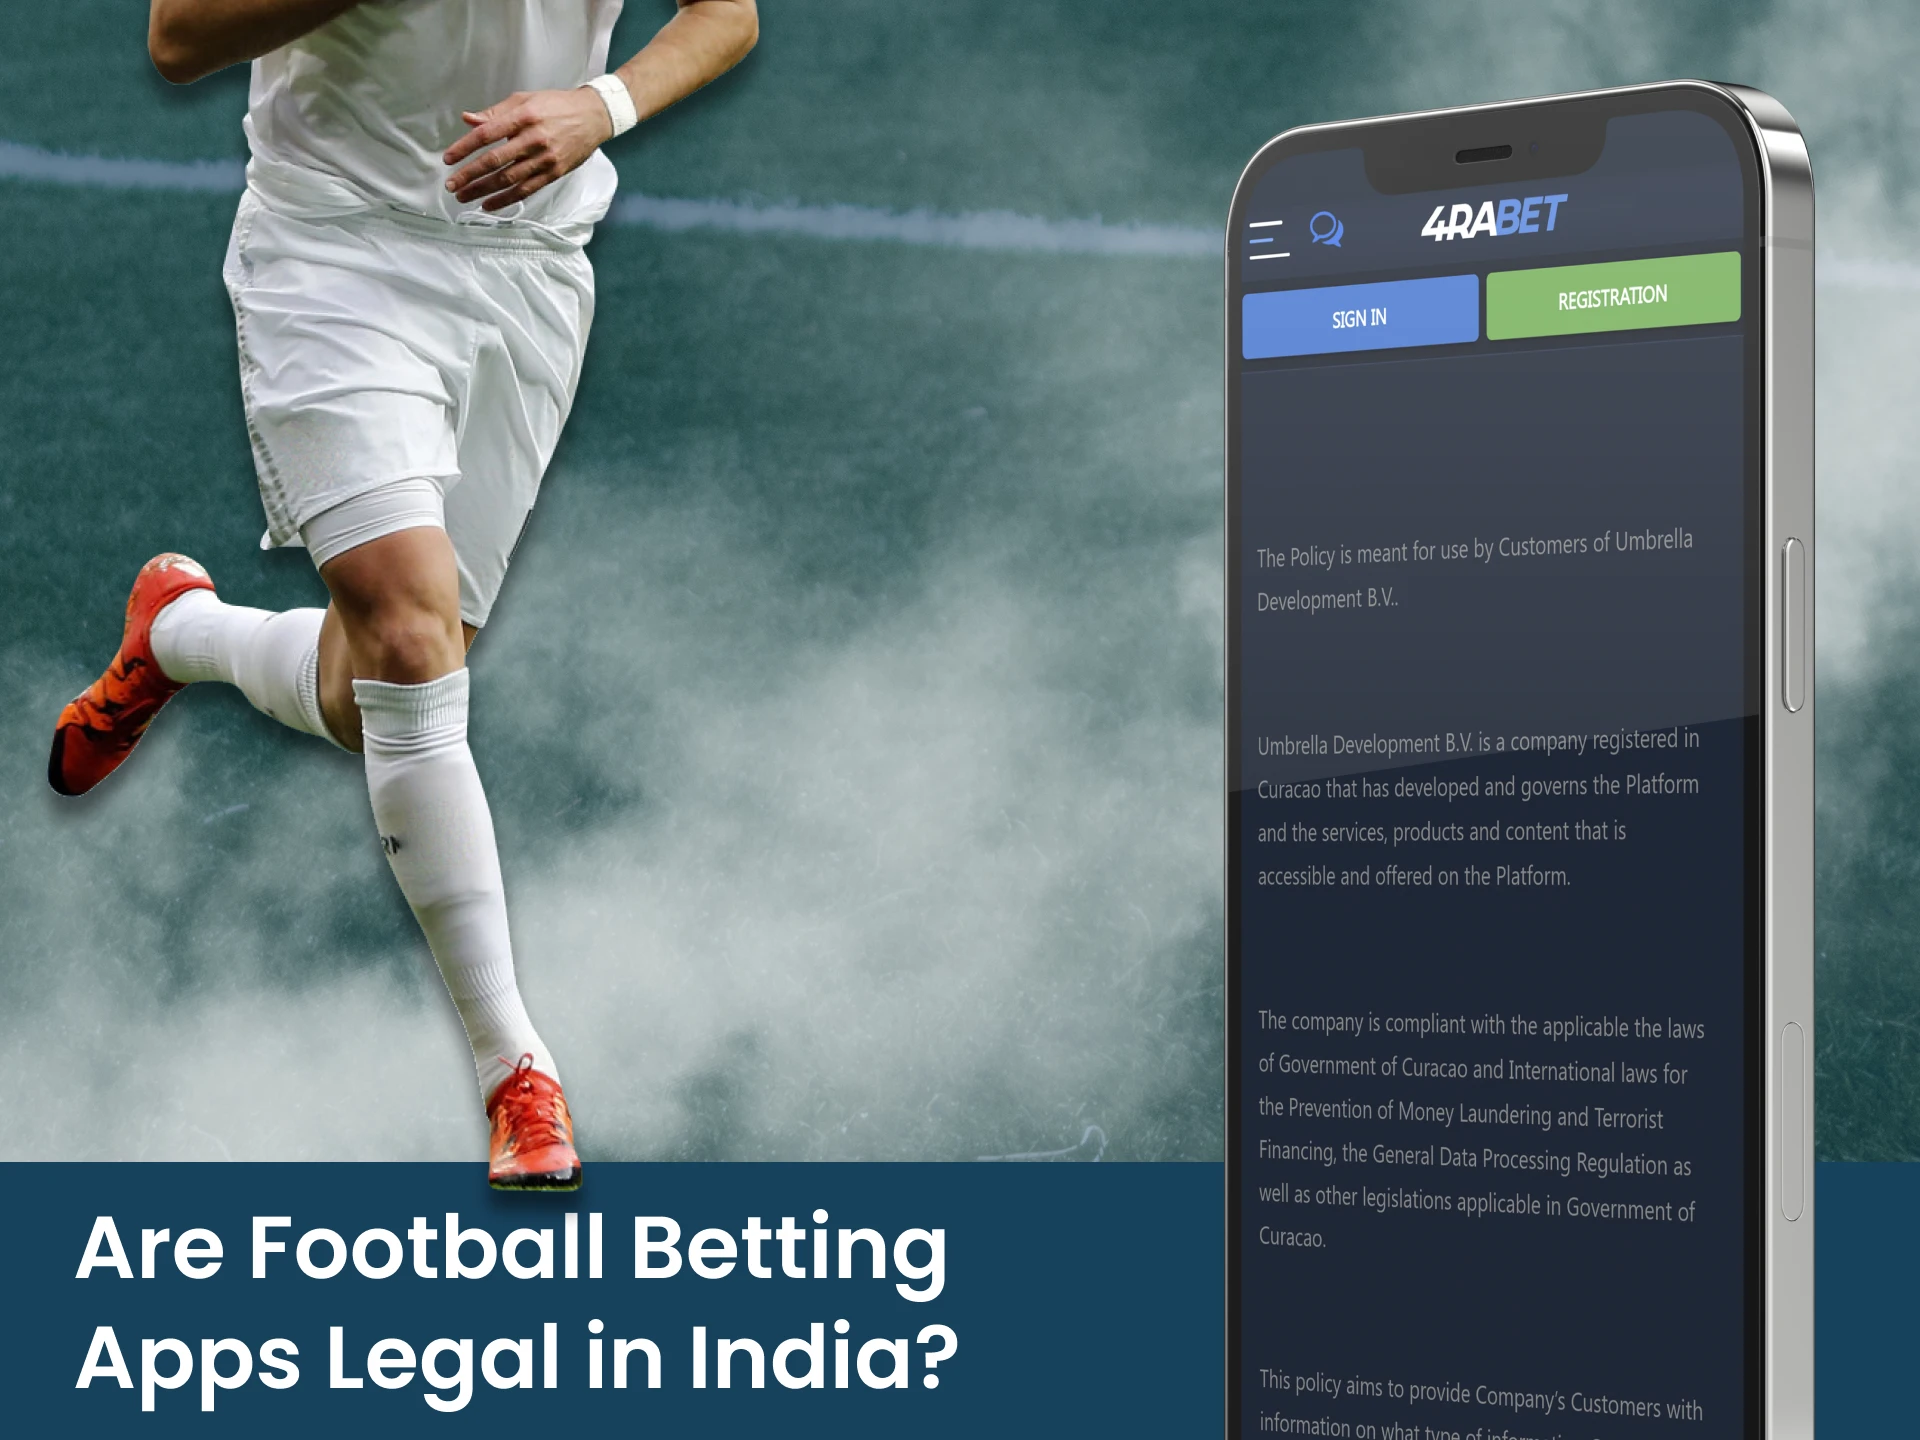 Football betting apps are absolutely legal in India.